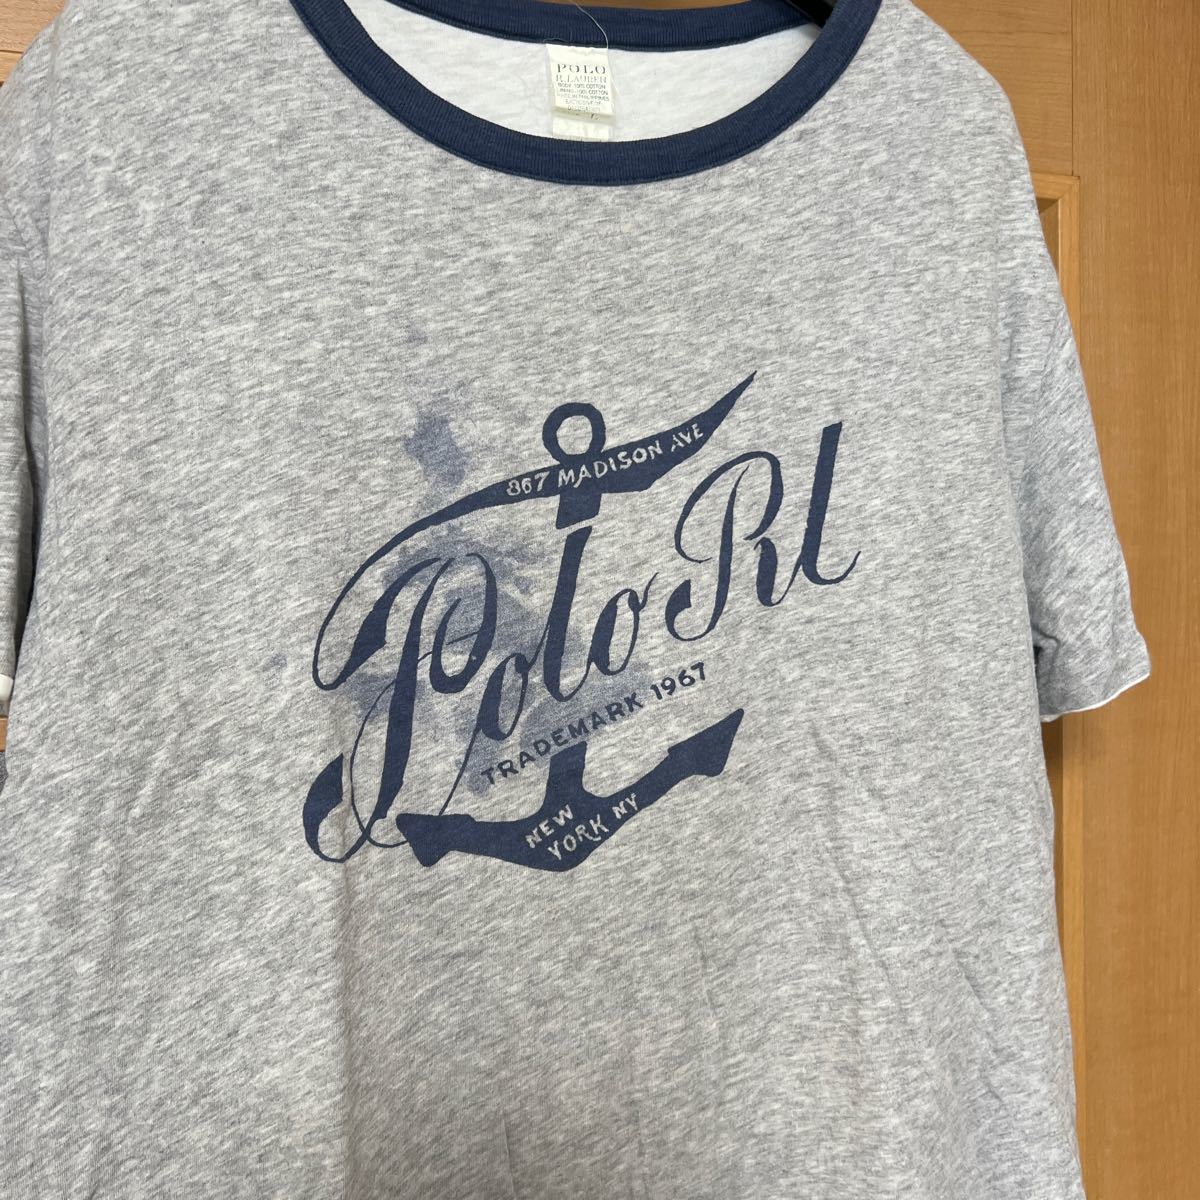 polo Ralph Lauren リバーシブル リング Tシャツ 珍品　RRL sports jeans rugby_画像2